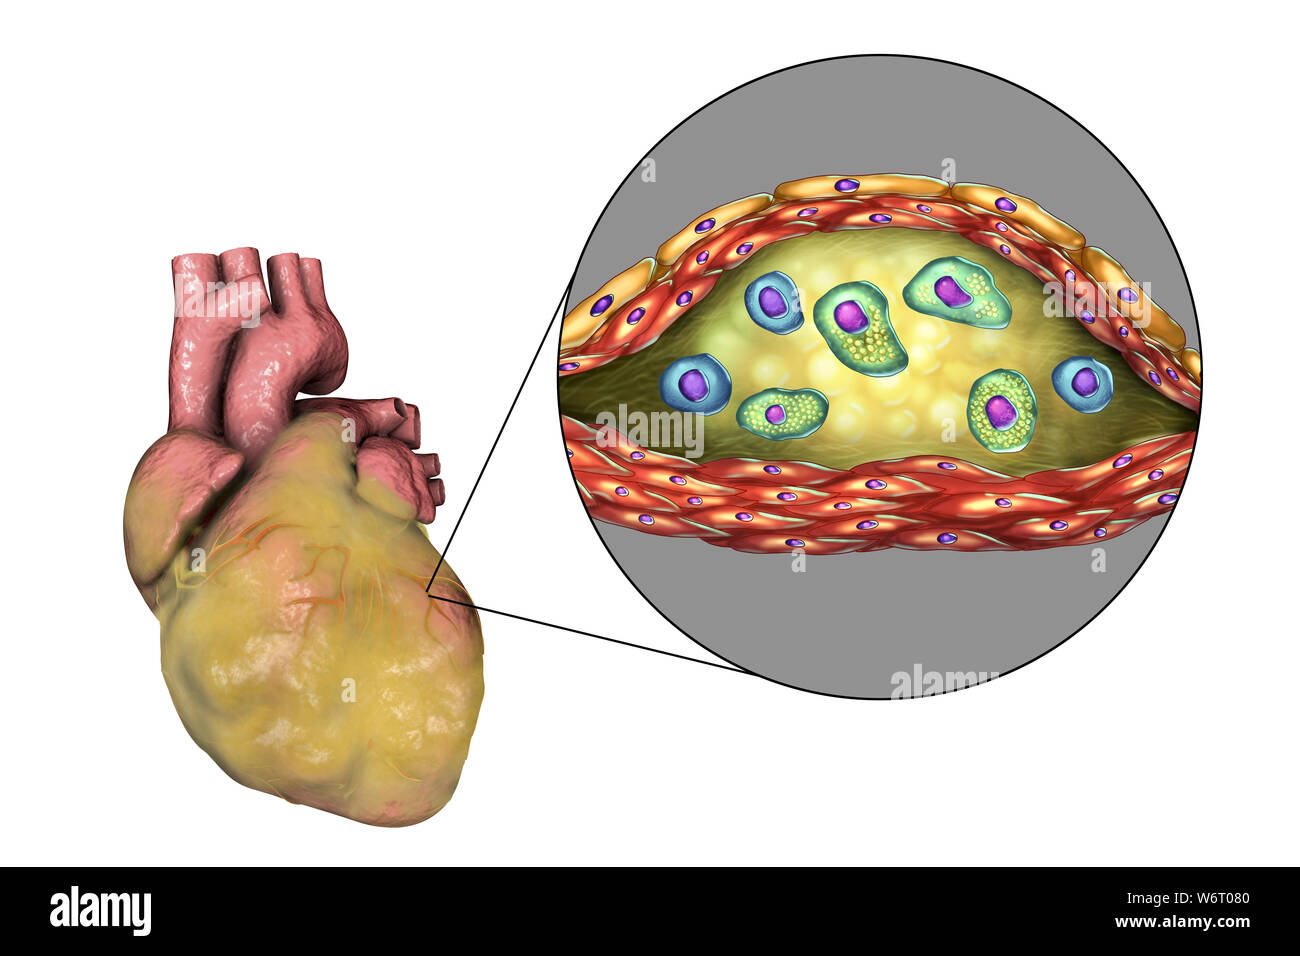 Heart disease, computer illustration. Diseased fatty heart and cross-section of an atherosclerotic plaque and its histological structure, such as necrotic centre, foam cells and T-lymphocytes. Its walls are made of smooth muscle cells and endothelium from the blood vessel. Stock Photo